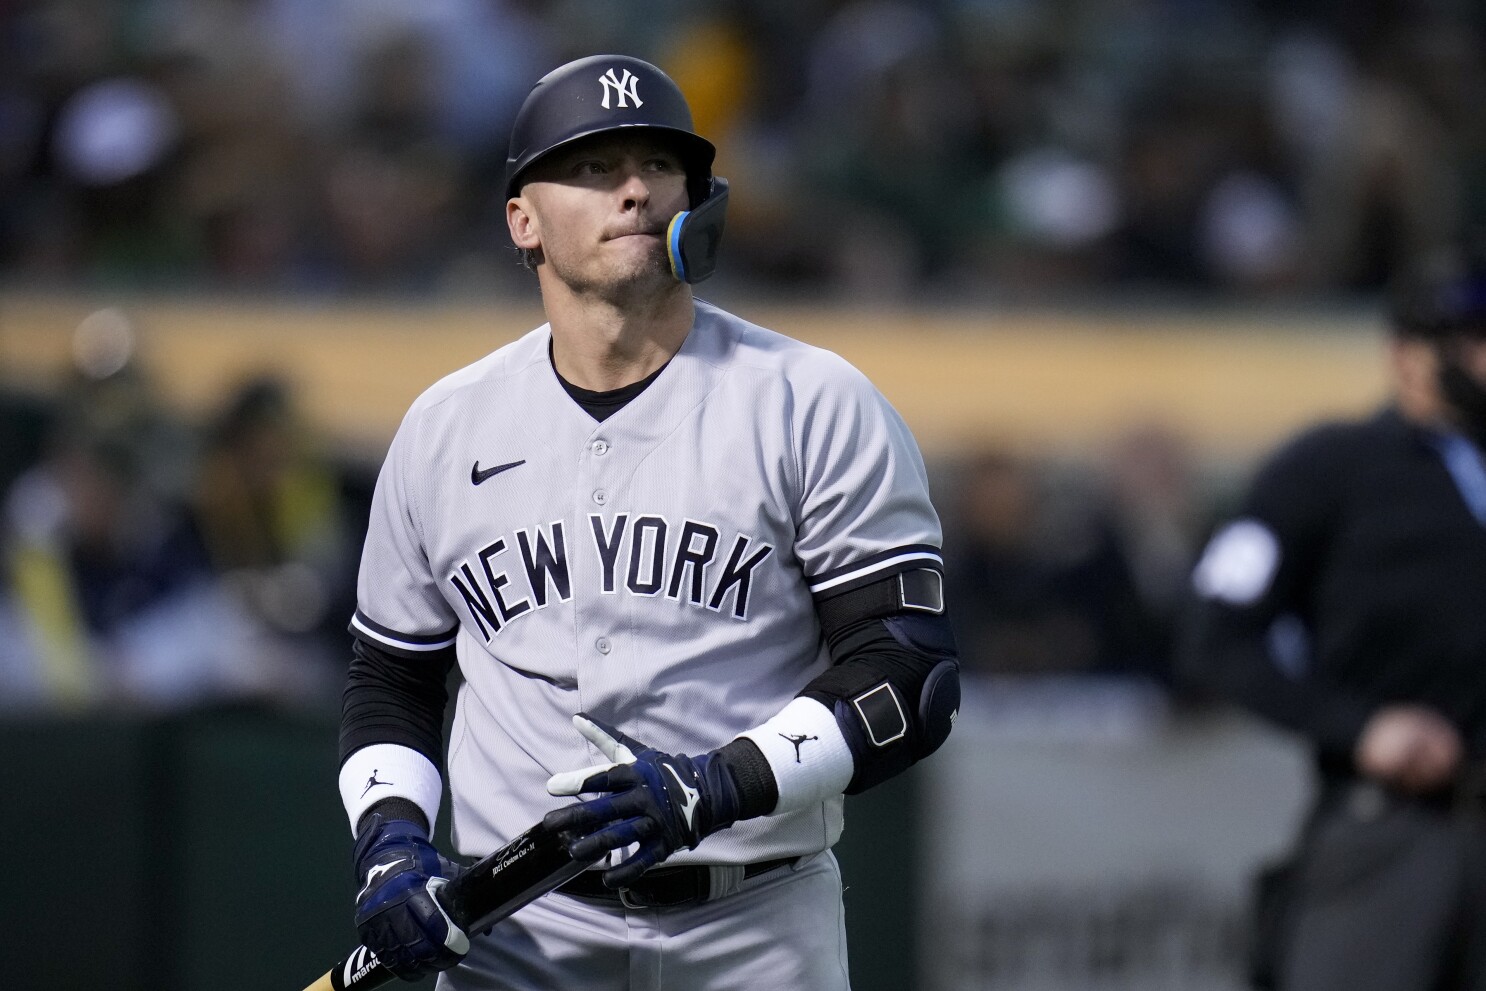 The New York Yankees ACTUALLY released Josh Donaldson